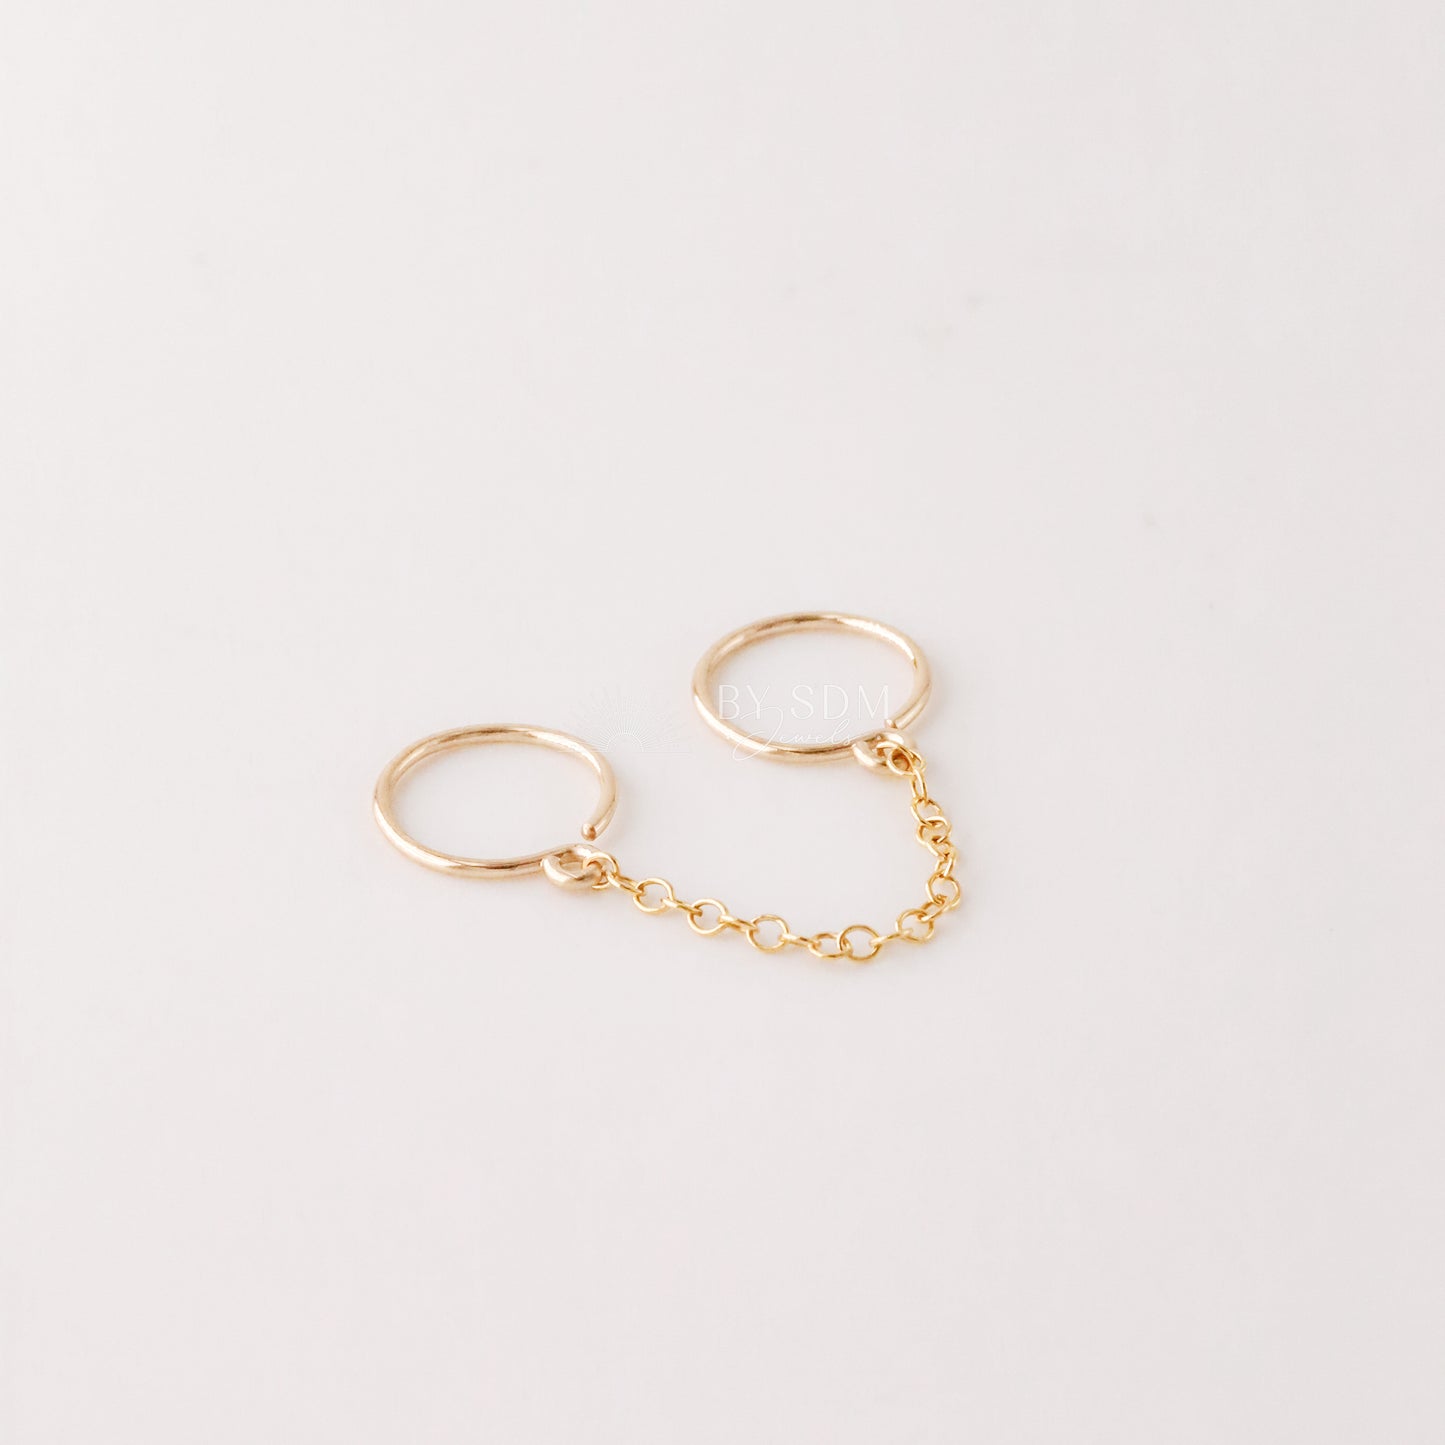 Double Hoop Earrings With Chain for Two Piercings • Huggies • Gold • Silver • Rose Gold • BYSDMJEWELS